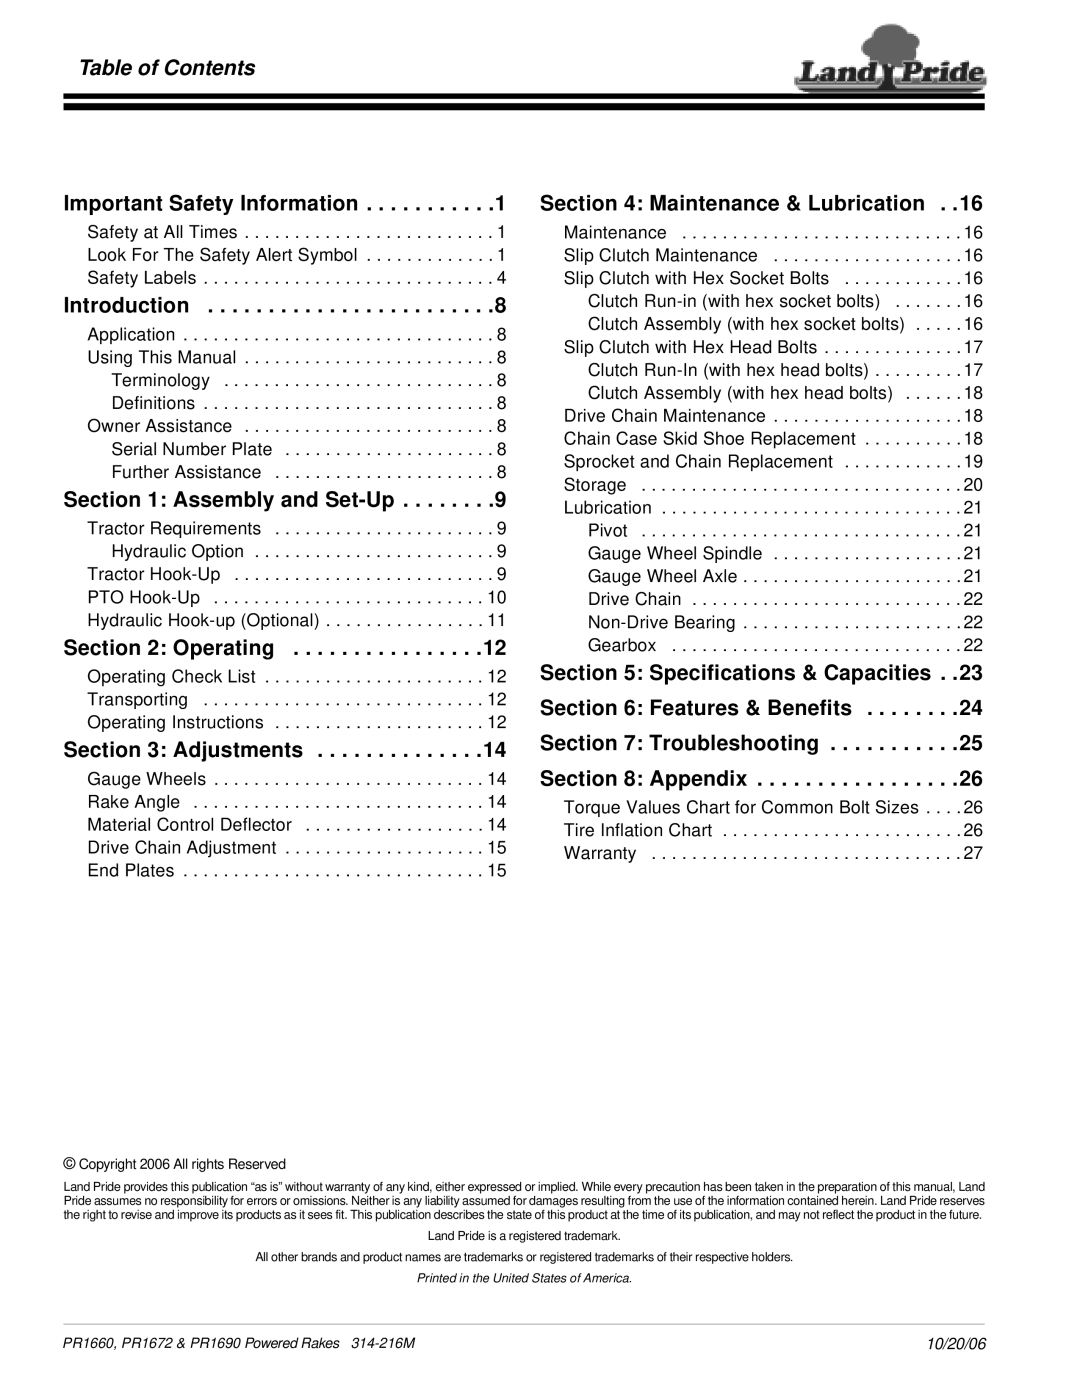 Land Pride PR1672 manual Table of Contents 